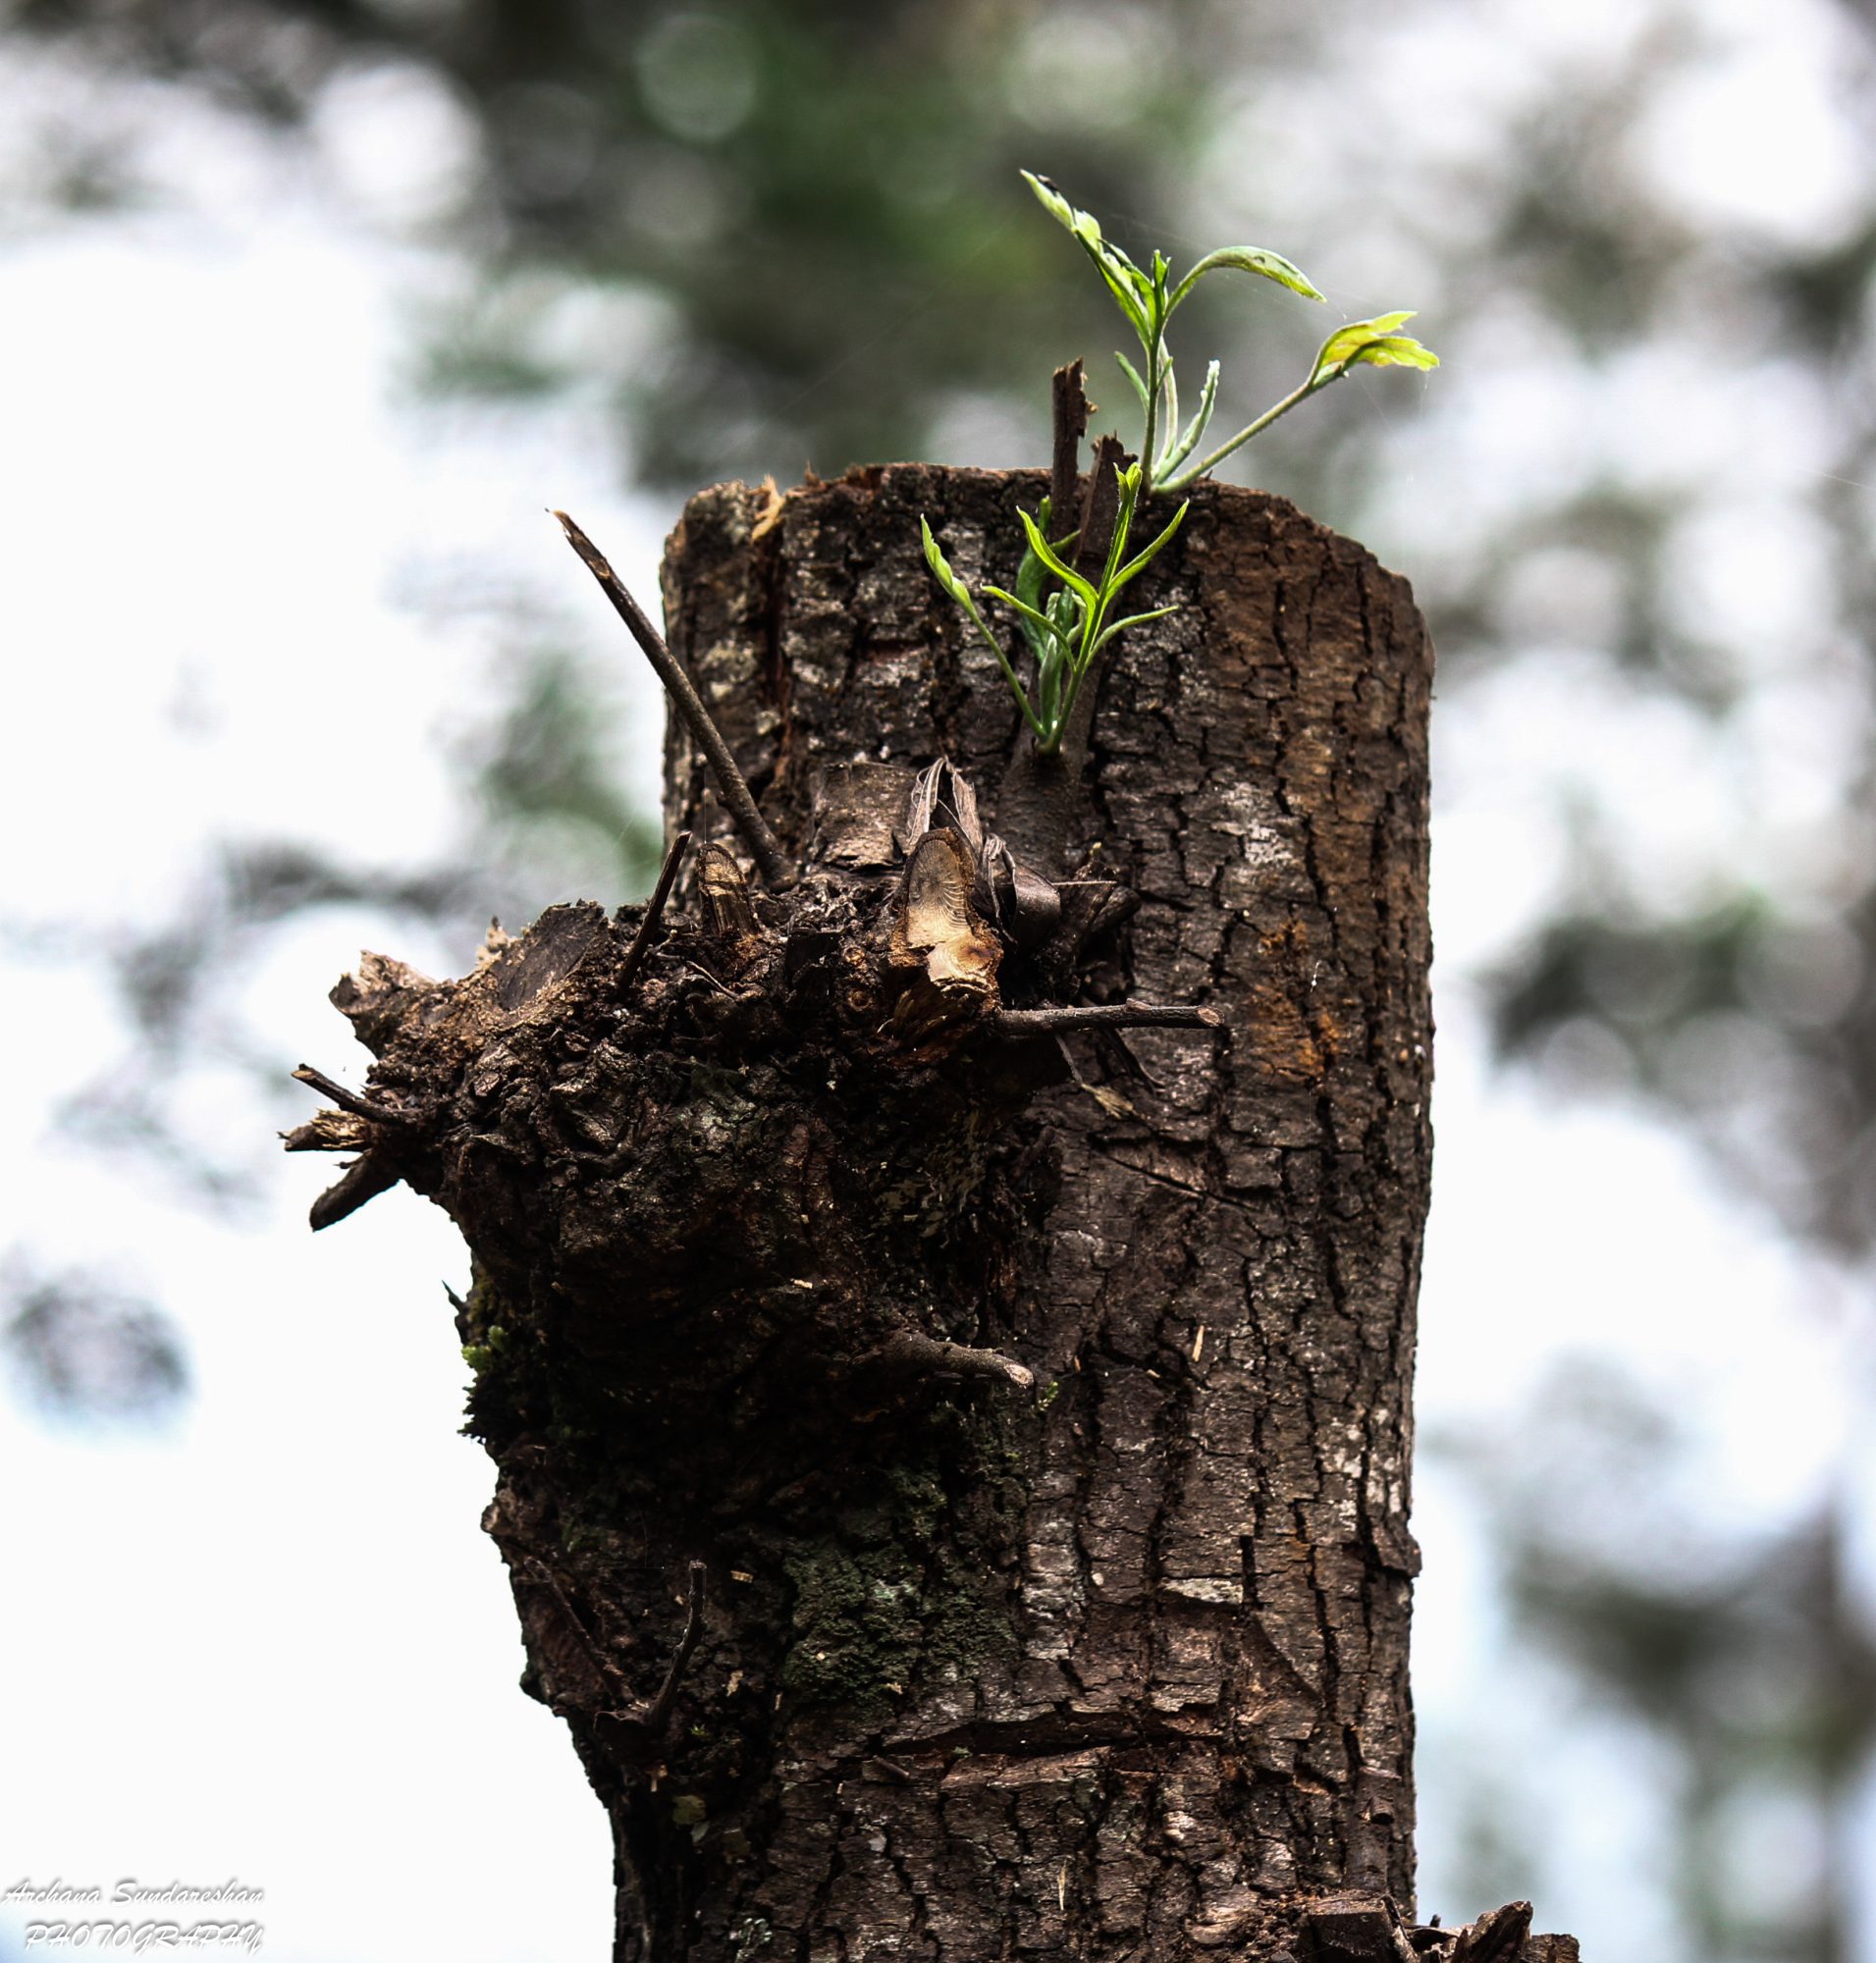 A tree cut down but life within rising and won't give up